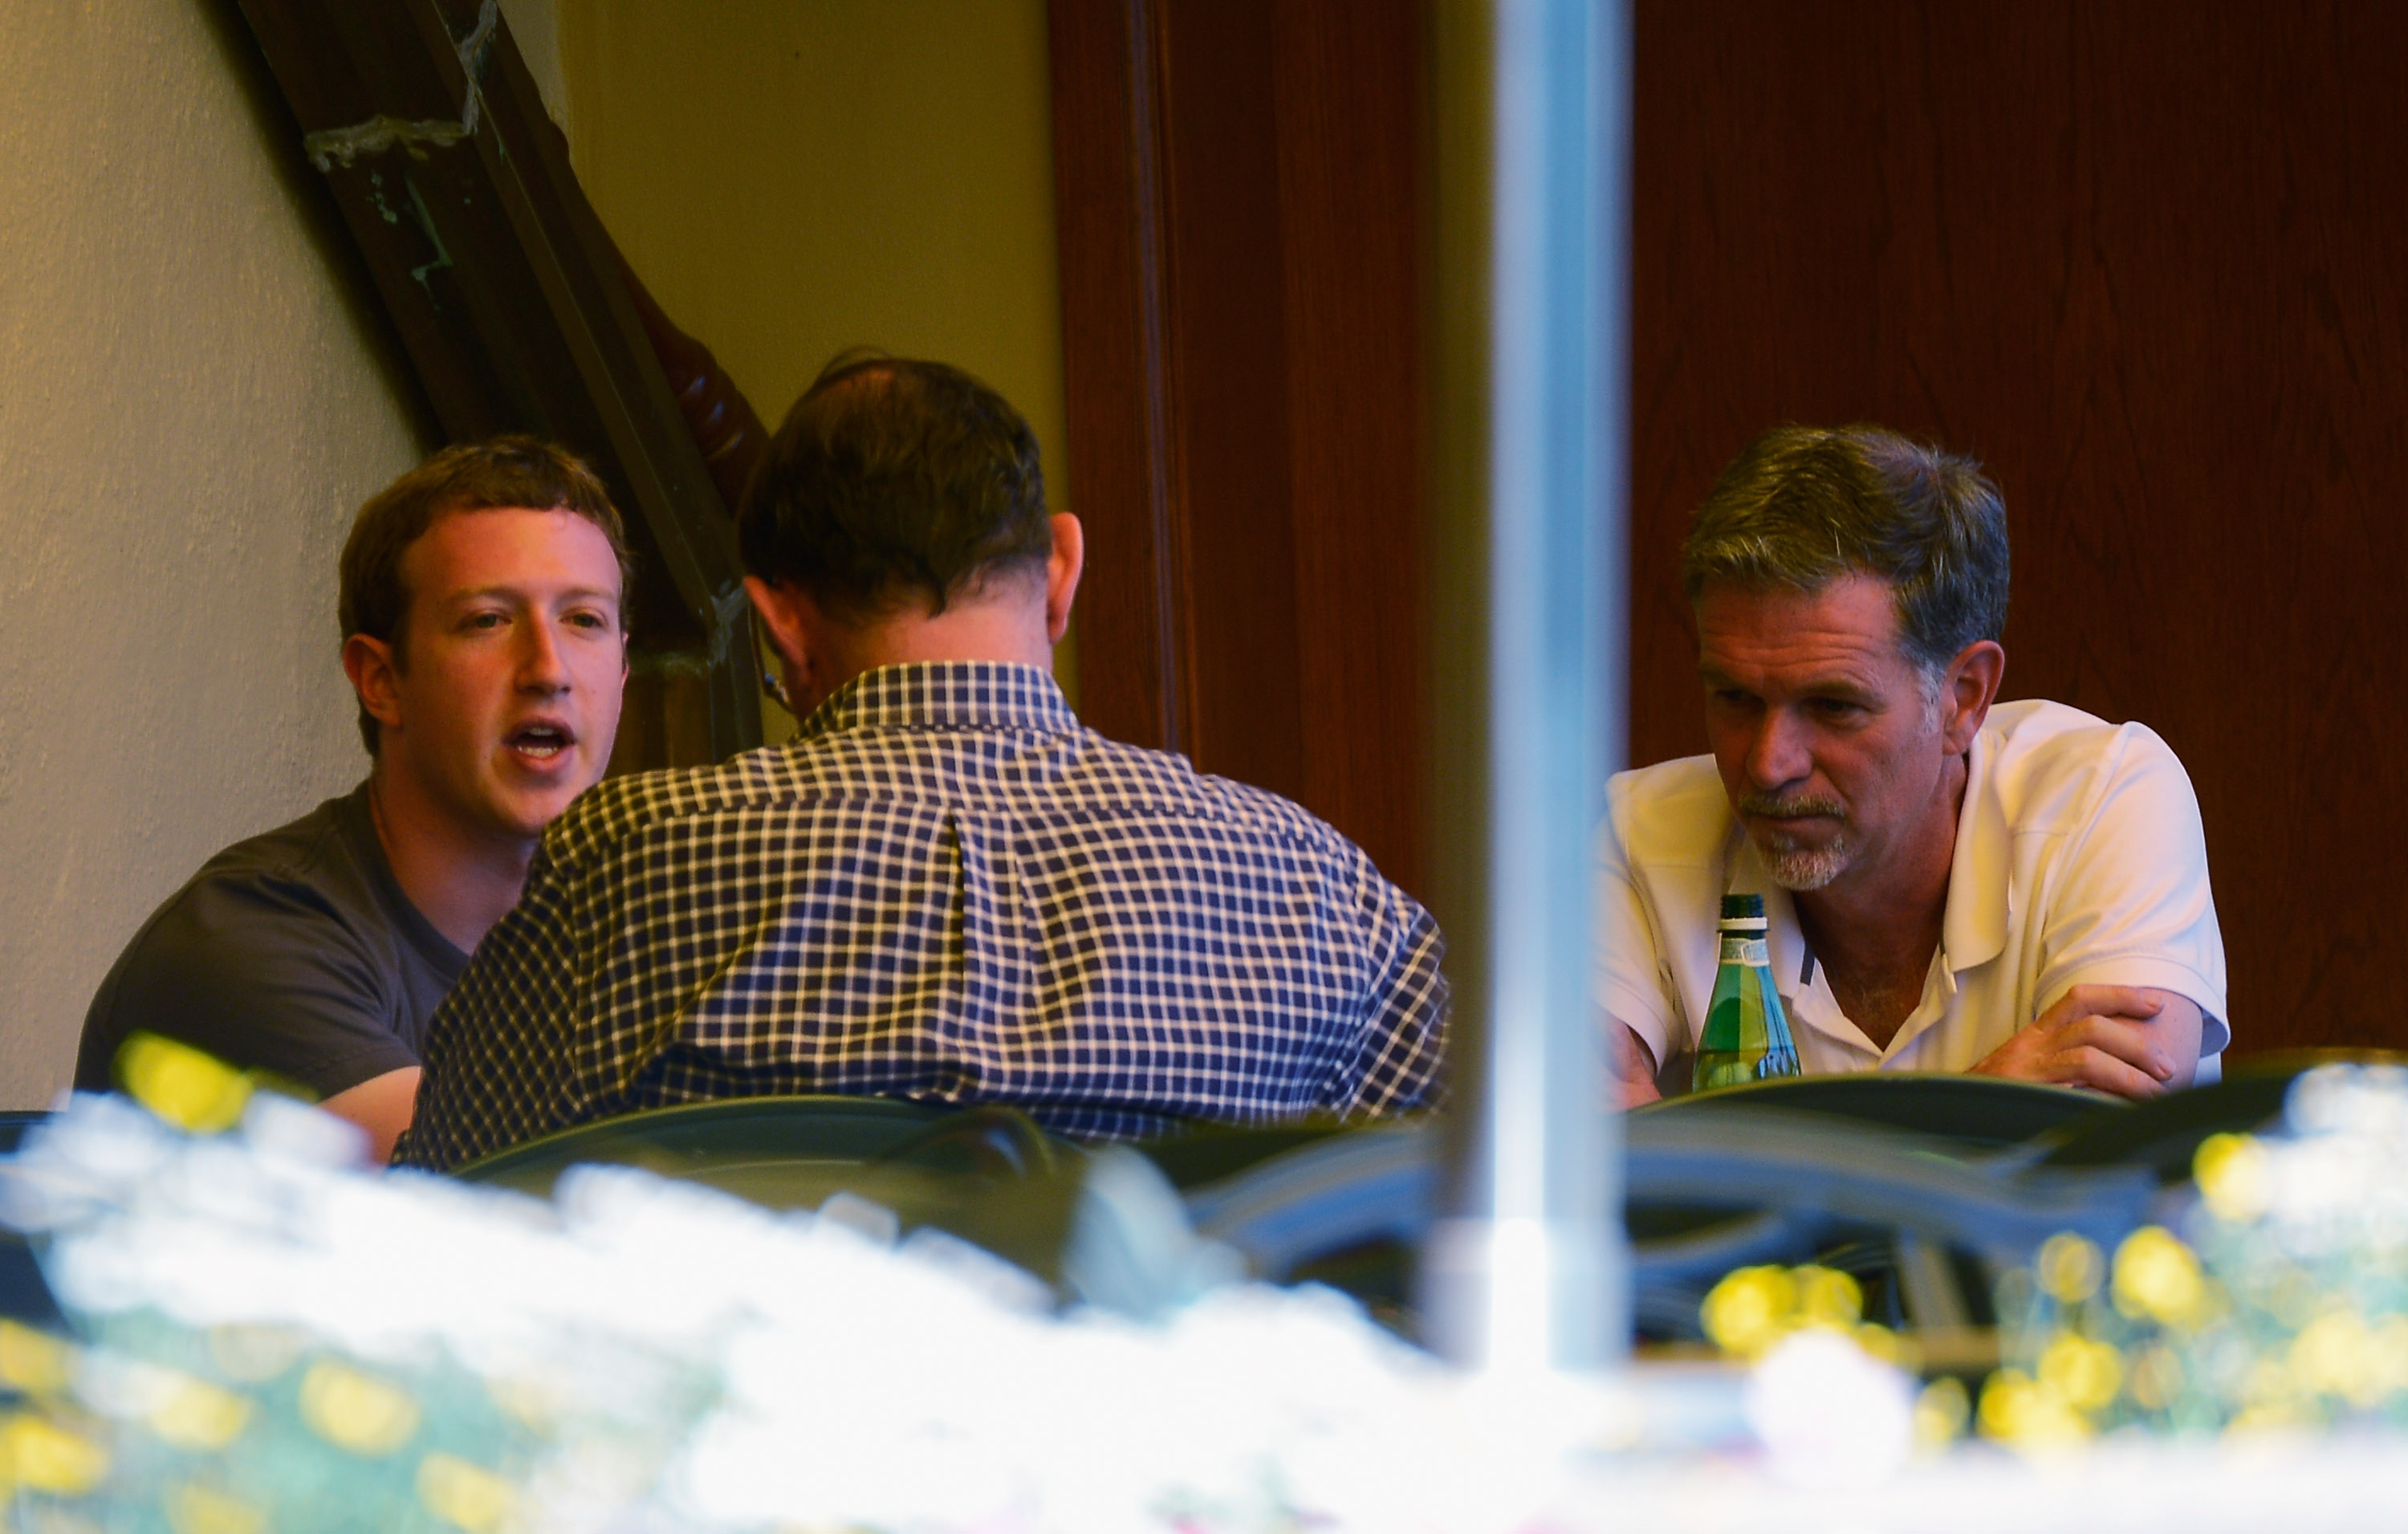 Facebook CEO Mark Zuckerberg and Netflix CEO Reed Hastings sitting at a table talking to a third person